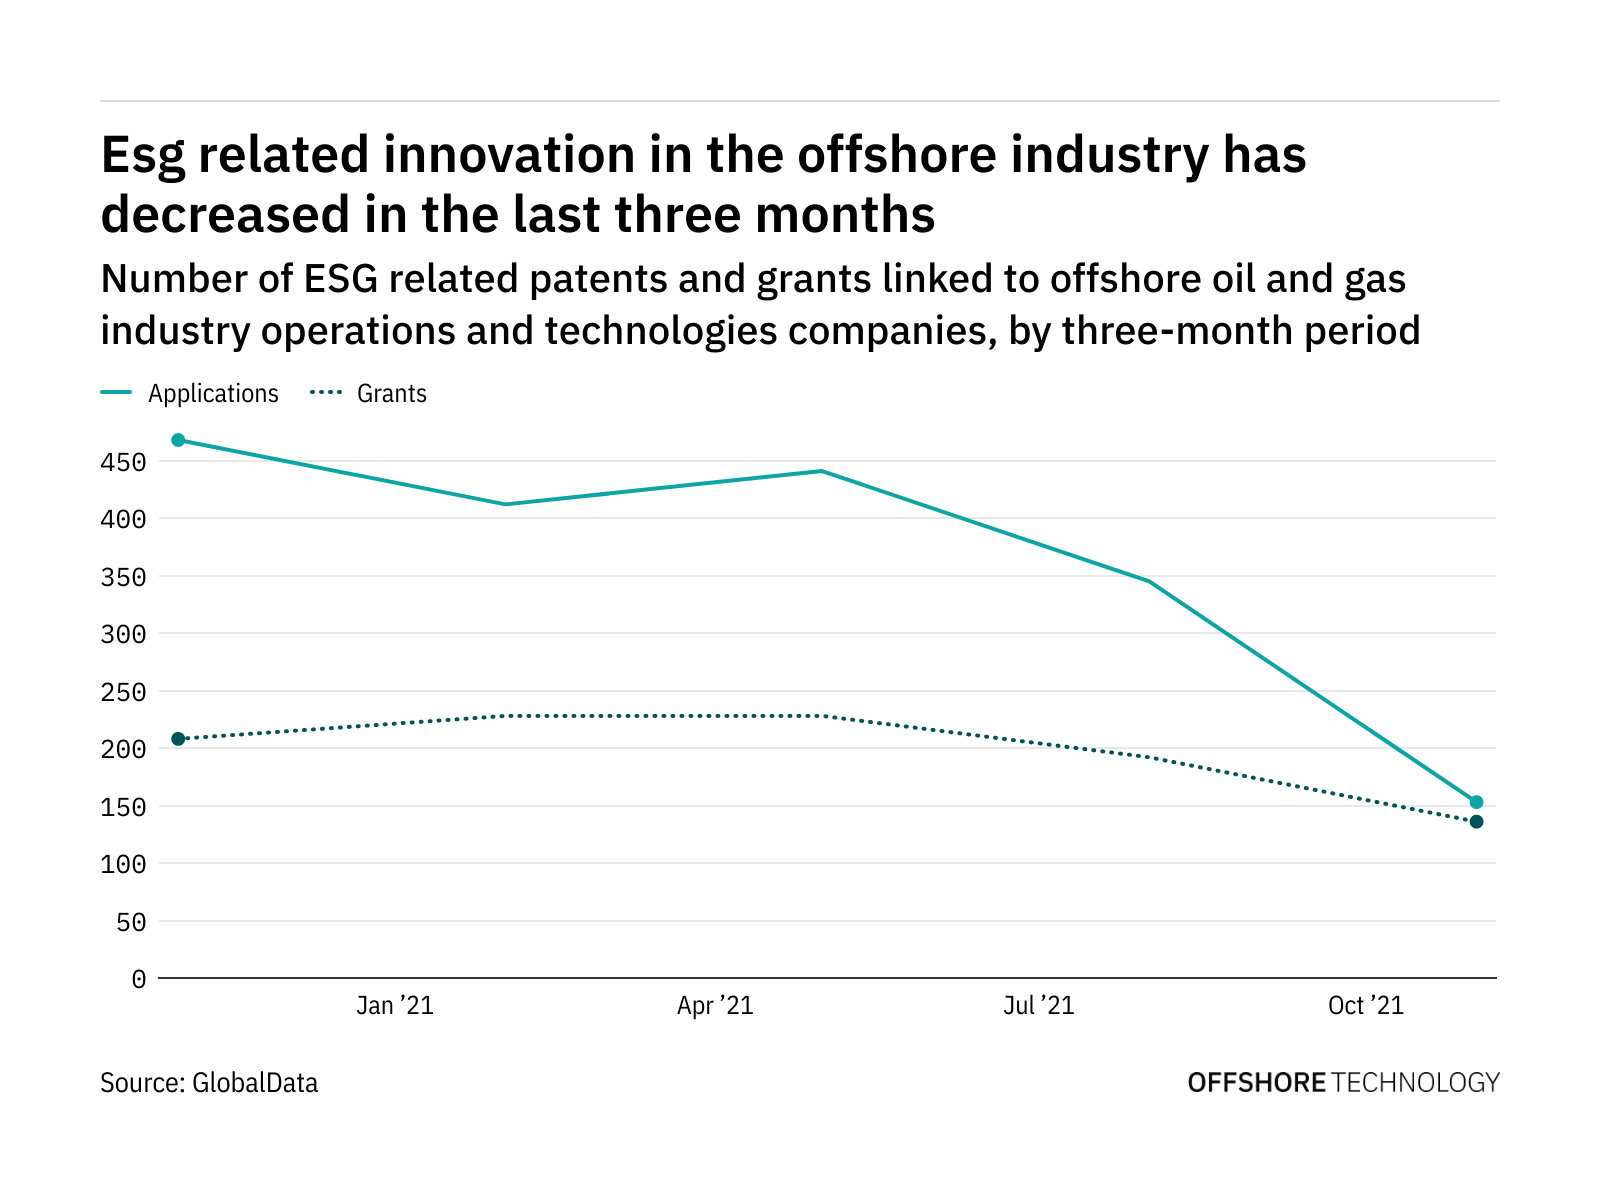 ESG innovation among offshore industry companies has dropped off in the last year